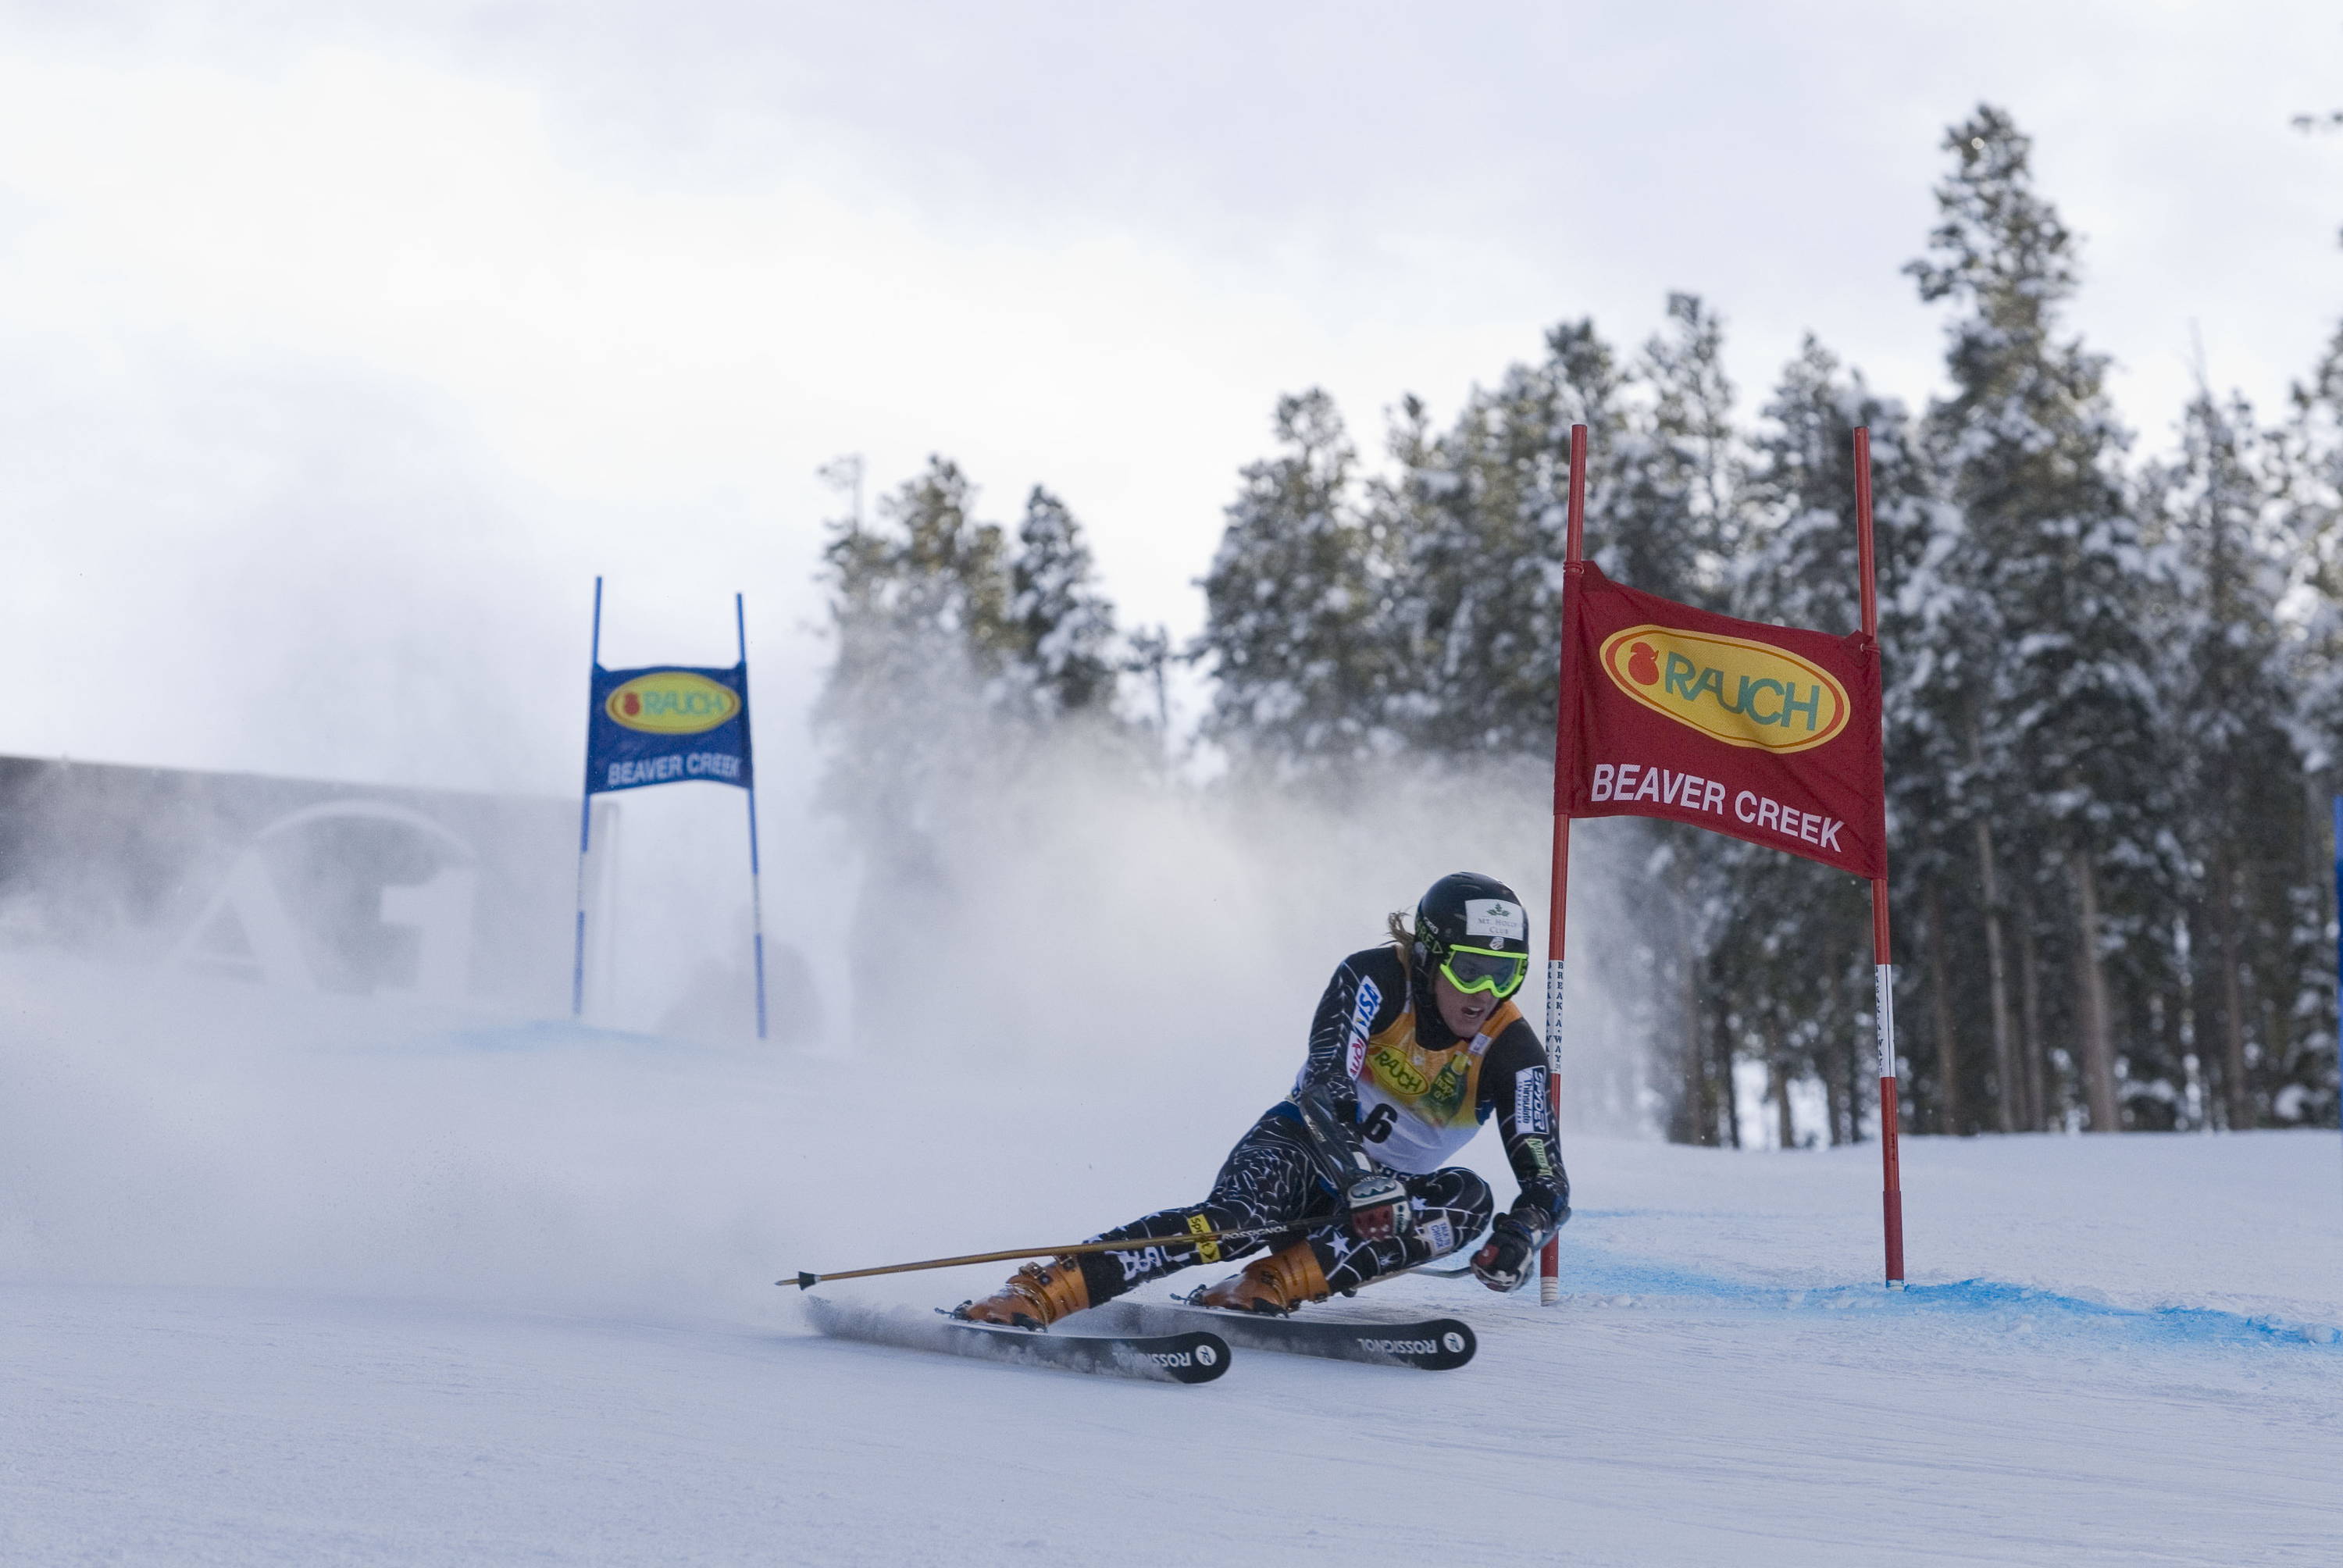 TED LIGETY ON THE RACE COURSE WITH THE ORIGINAL NASTIFY GREEN